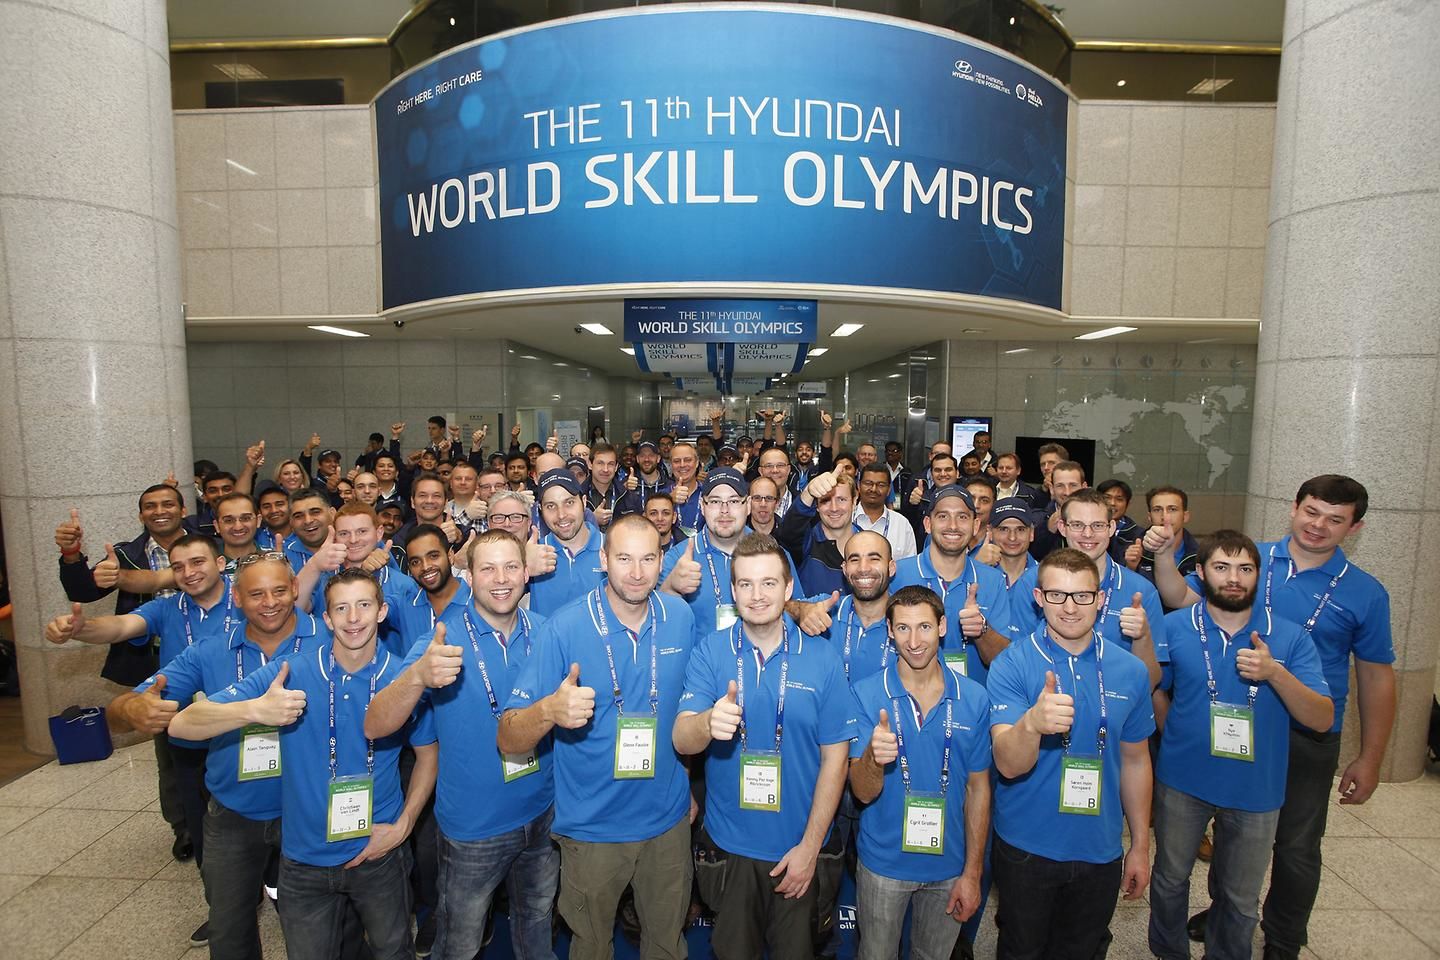 The 11th ‘Hyundai World Skill Olympics’ Held In Korea to Reinforce Service Importance